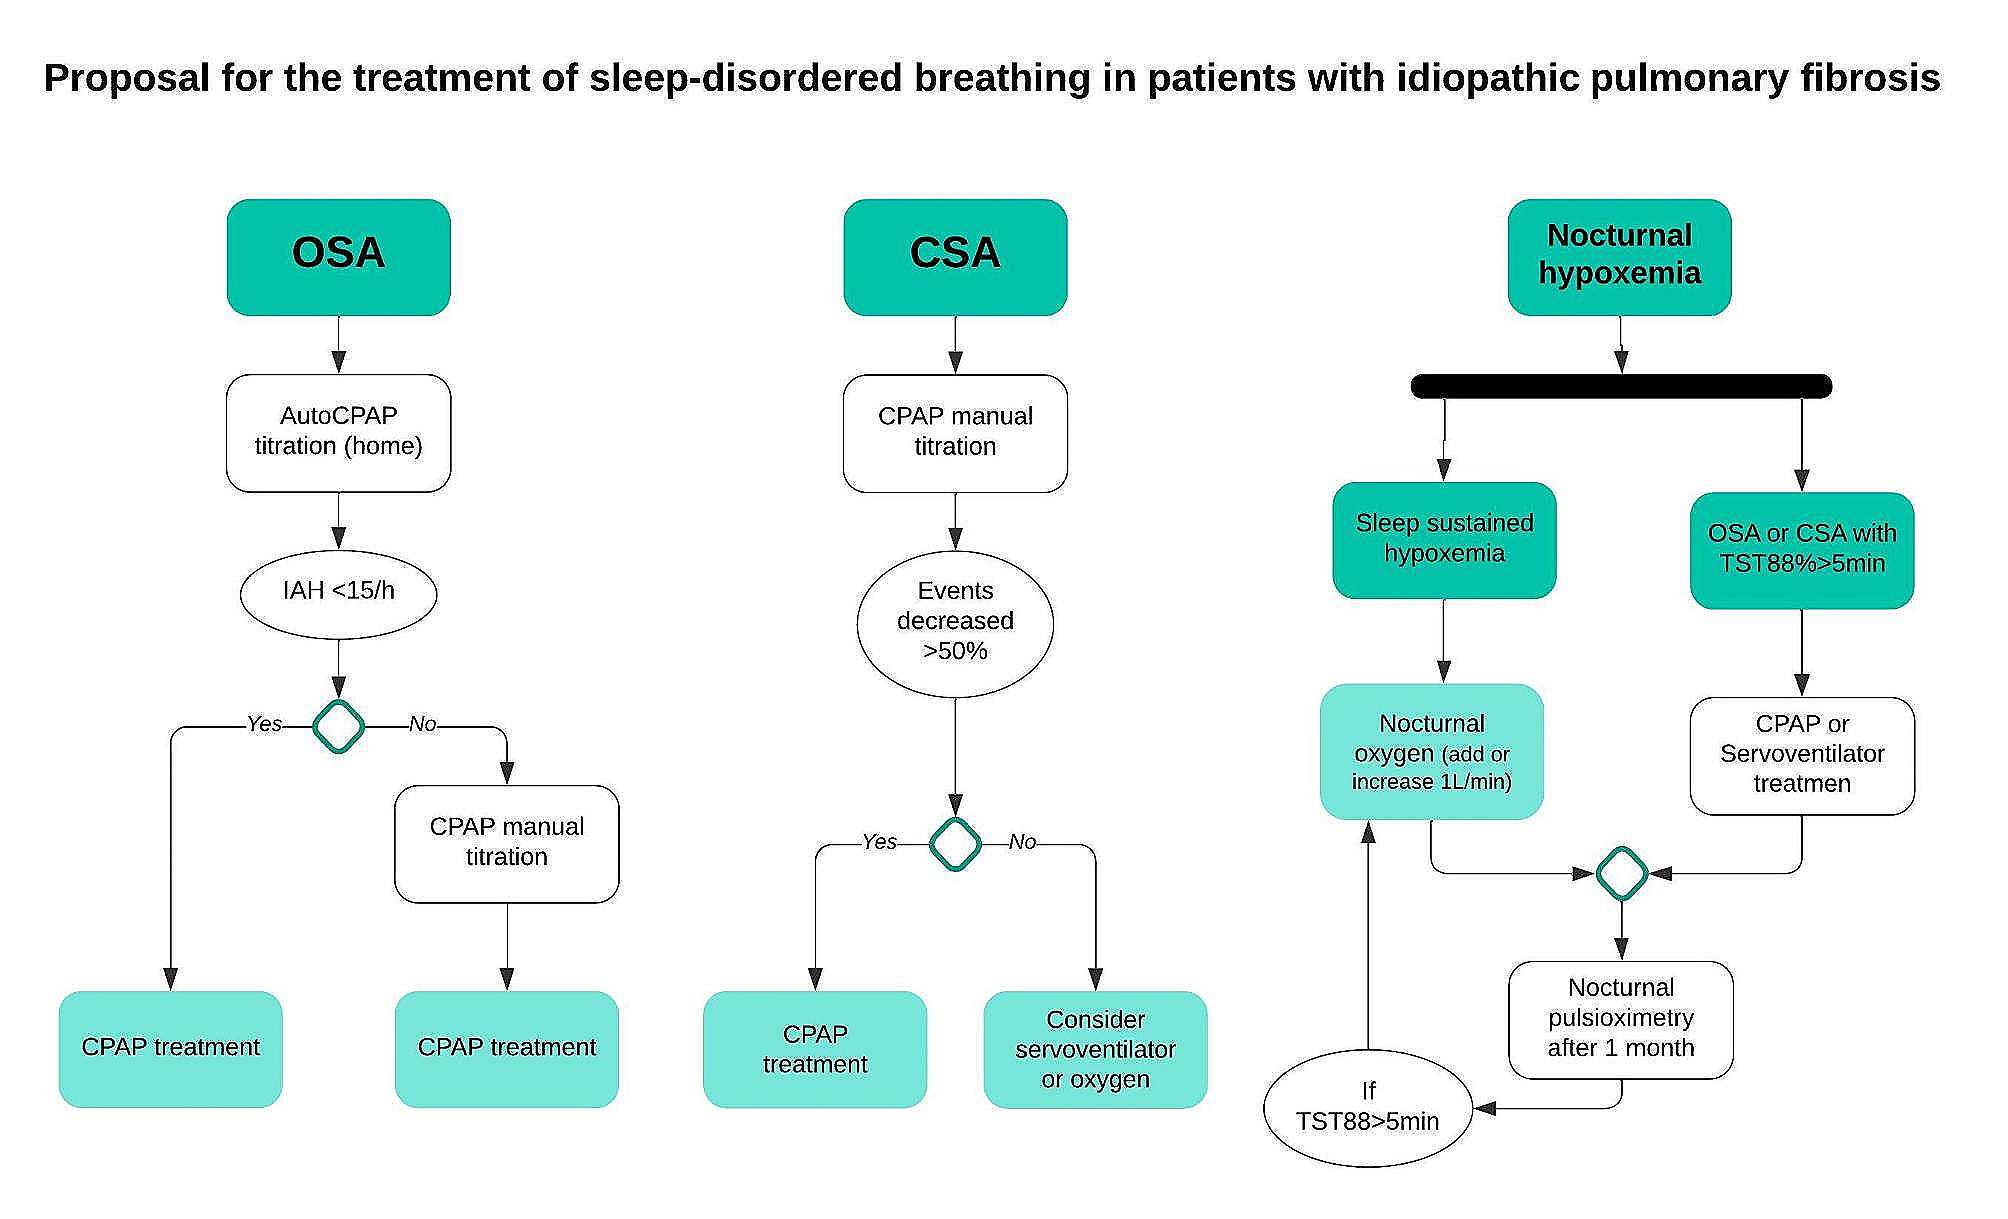 Treating sleep-disordered breathing of idiopathic pulmonary fibrosis patients with CPAP and nocturnal oxygen treatment. A pilot study